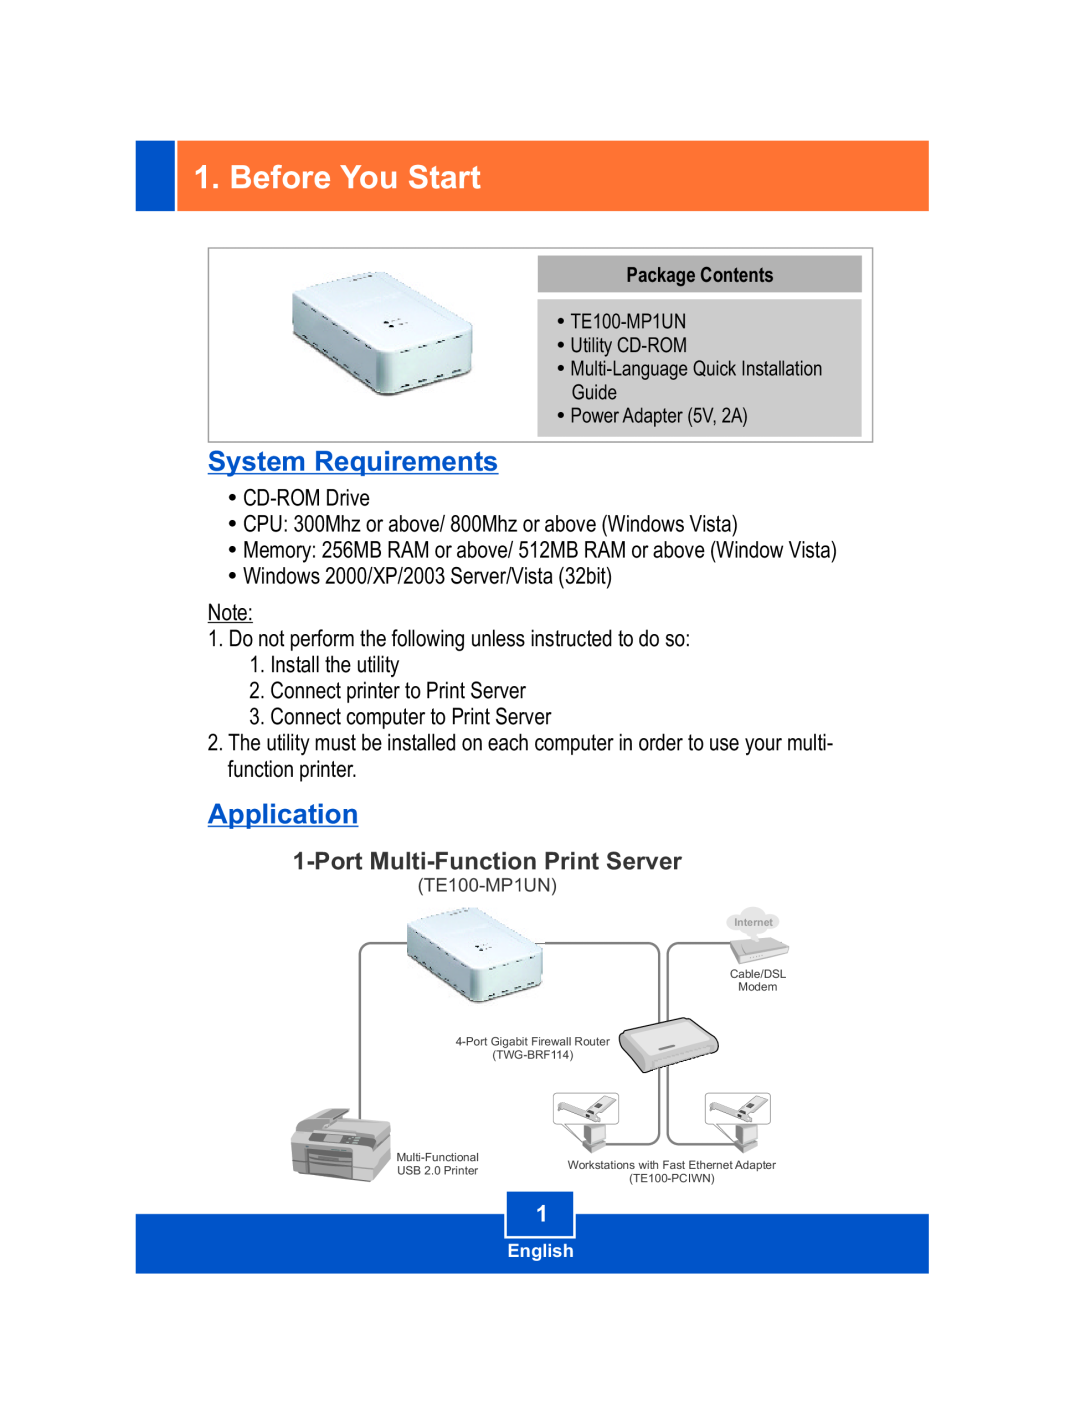 TRENDnet Multi-Function Printer manual Before You Start, System Requirements, Application, Port Multi-Function Print Server 